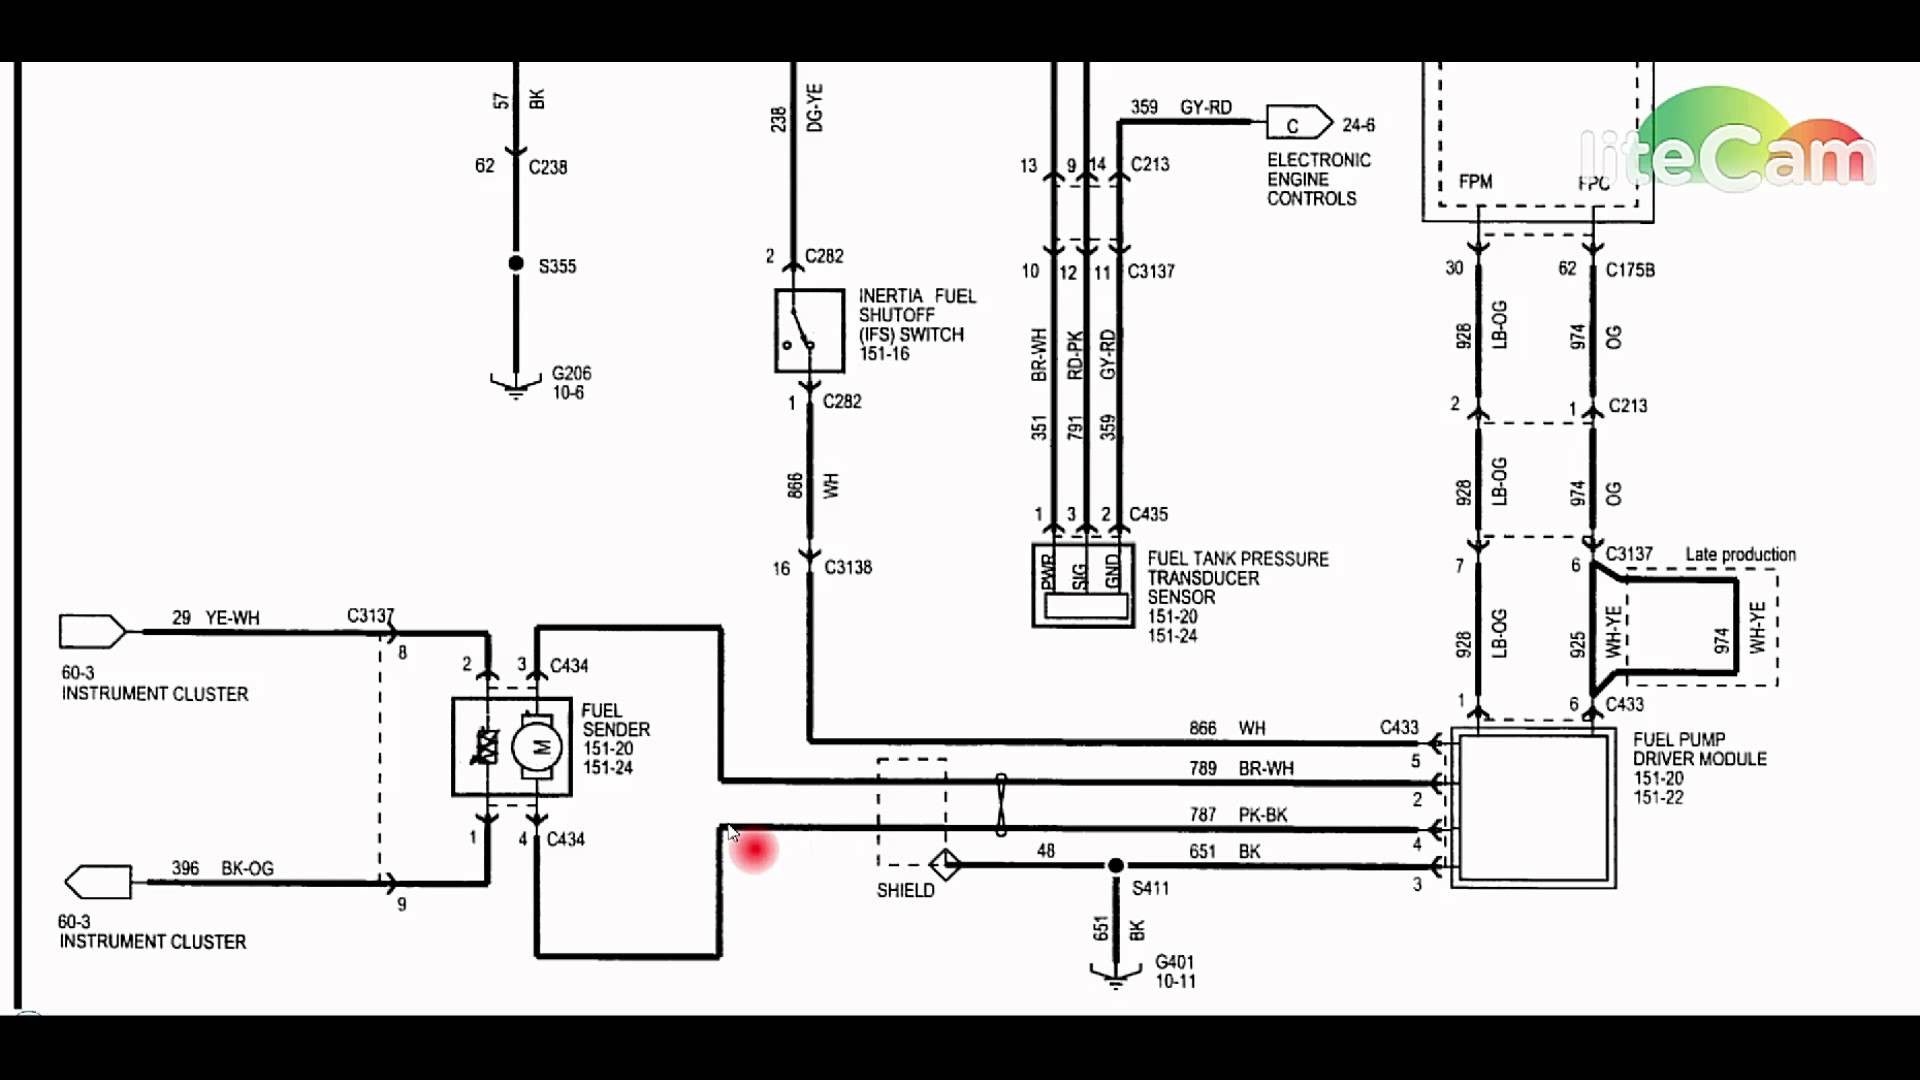 Diagram Of Fuel Injection System Panel Diagram 1997 ford 1988 ford F150 Fuel Pump Wiring Diagram More Of Diagram Of Fuel Injection System